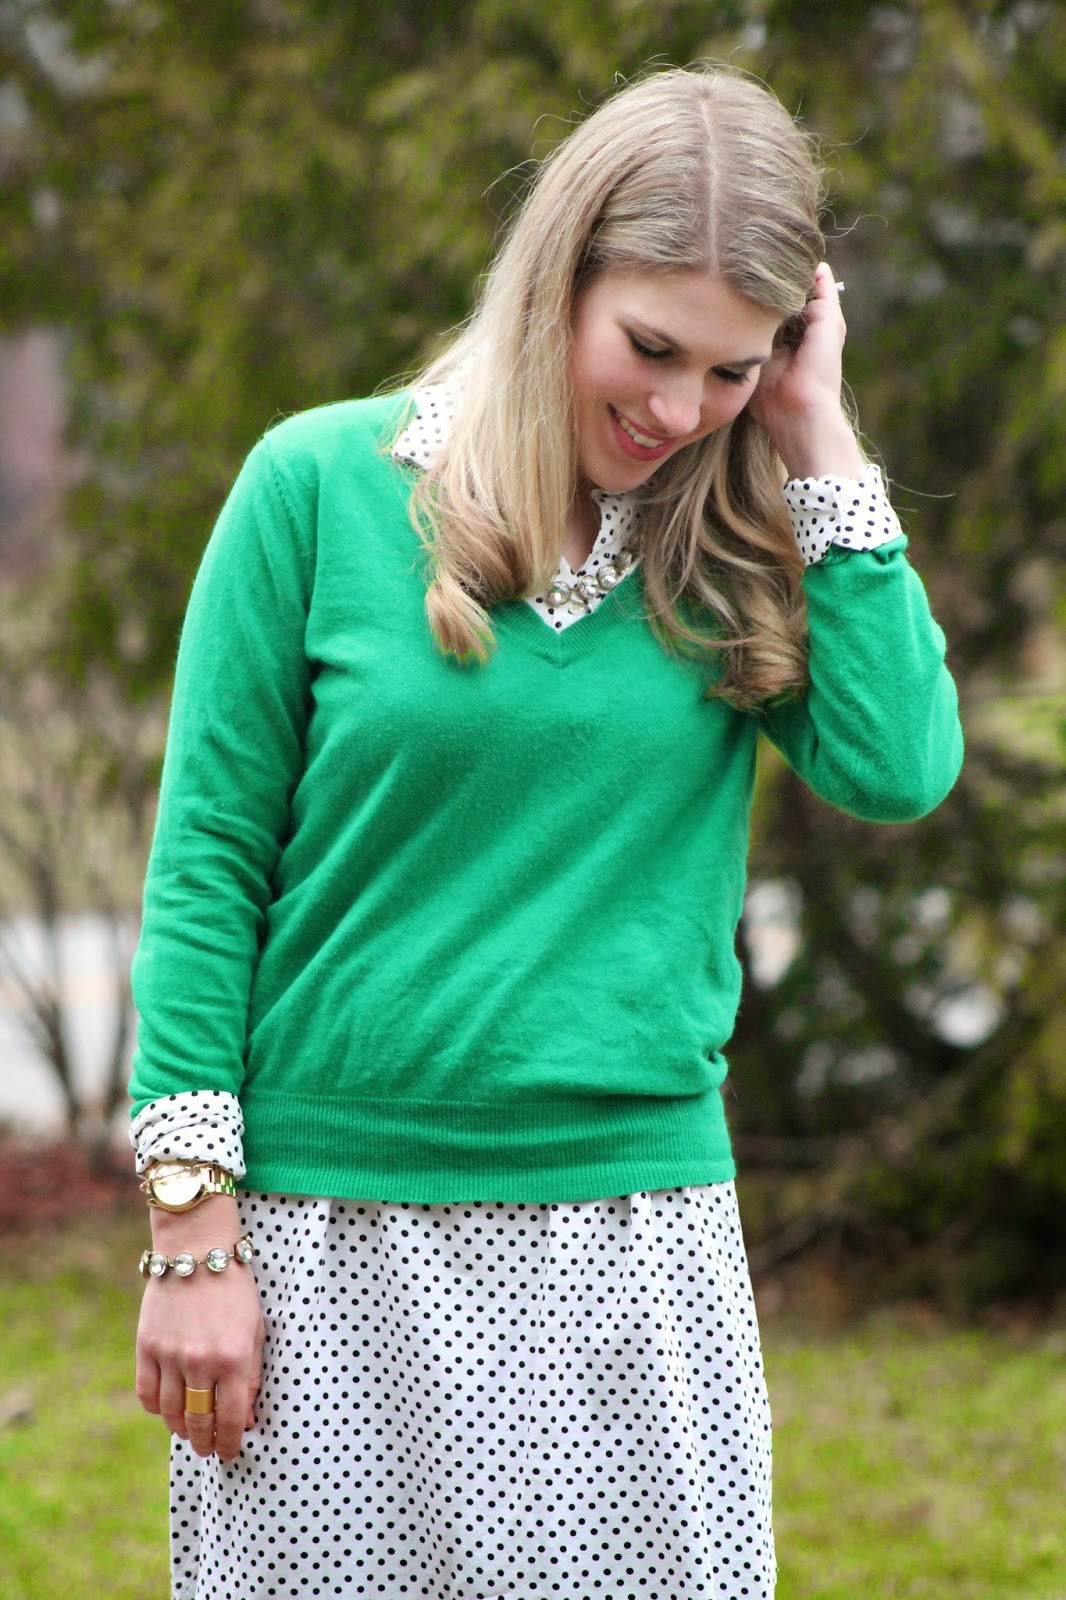 I do deClaire: Polka Dot dress and Green Sweater